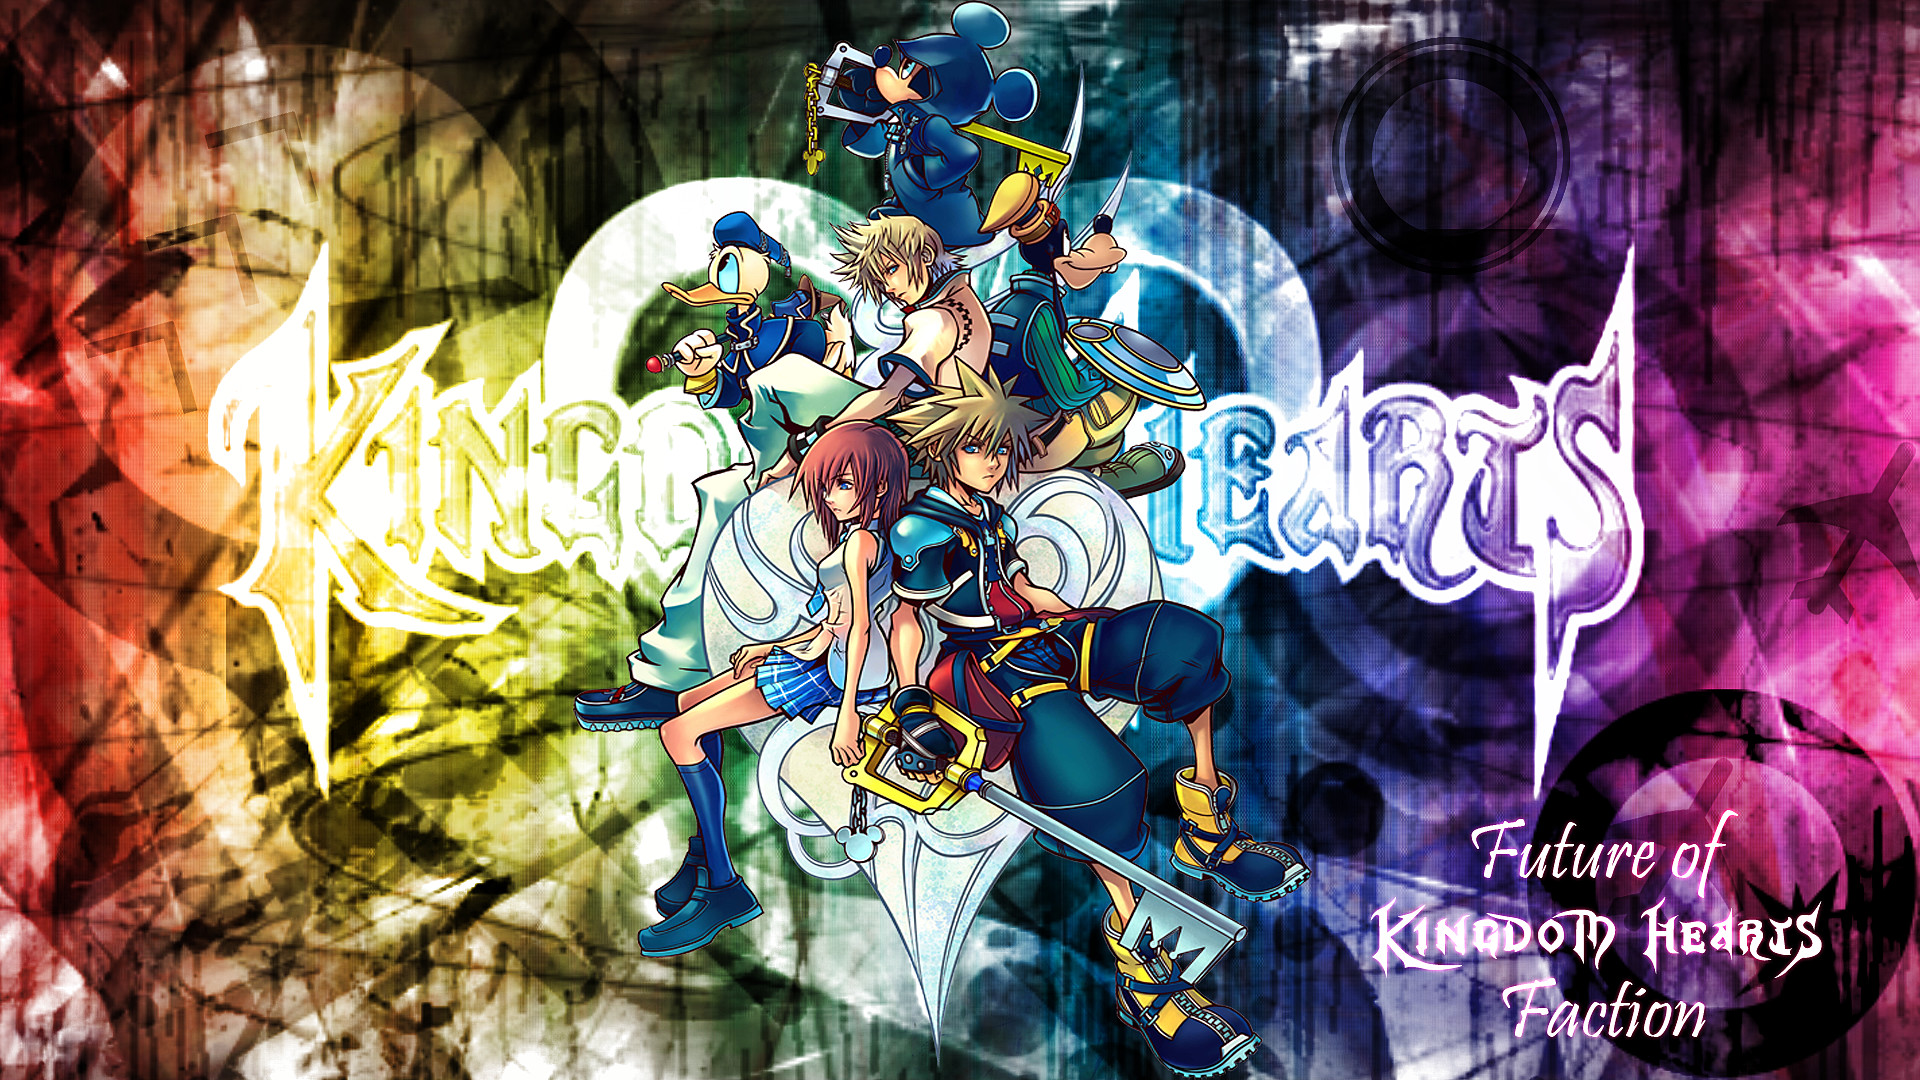 85 Kingdom Hearts Hd Wallpapers Backgrounds Wallpaper Abyss 1920x1080